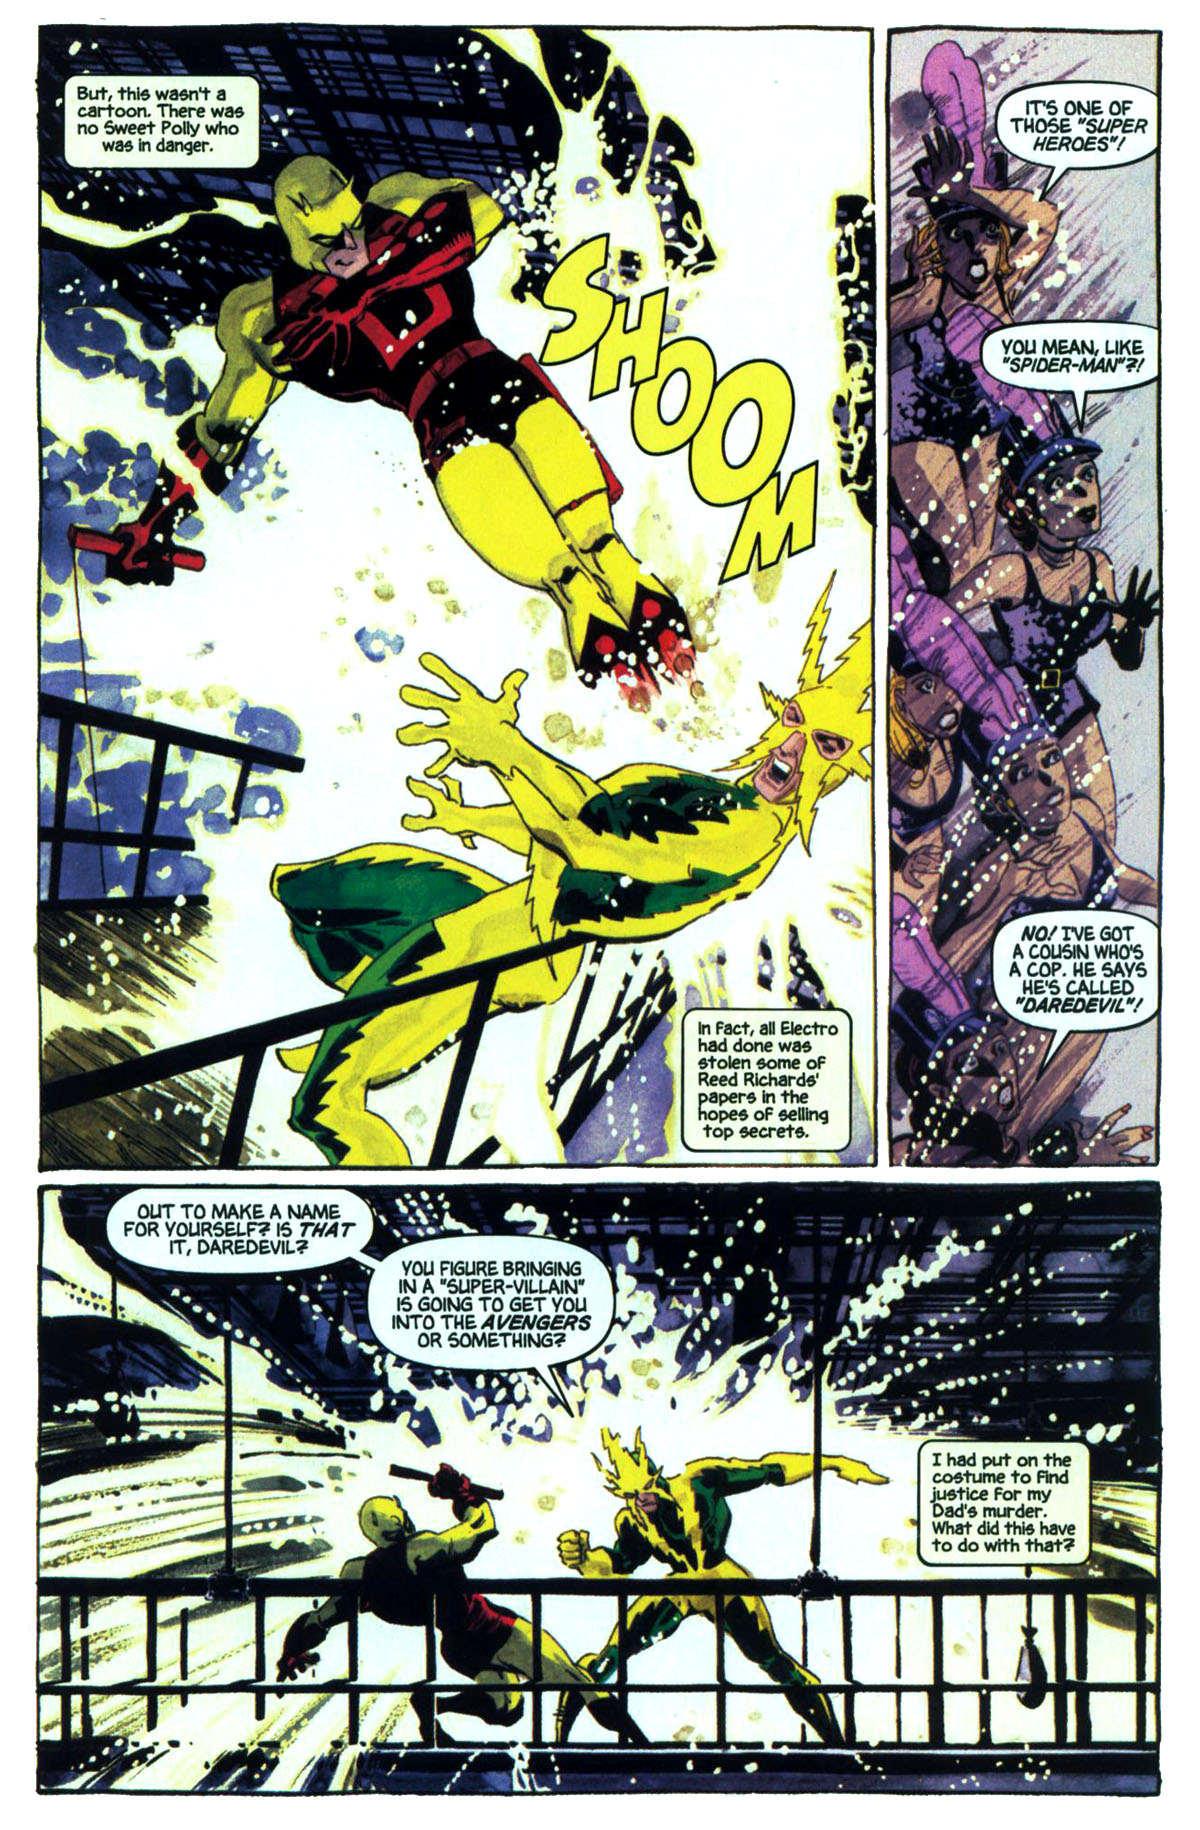 Read online Daredevil: Yellow comic -  Issue #4 - 7